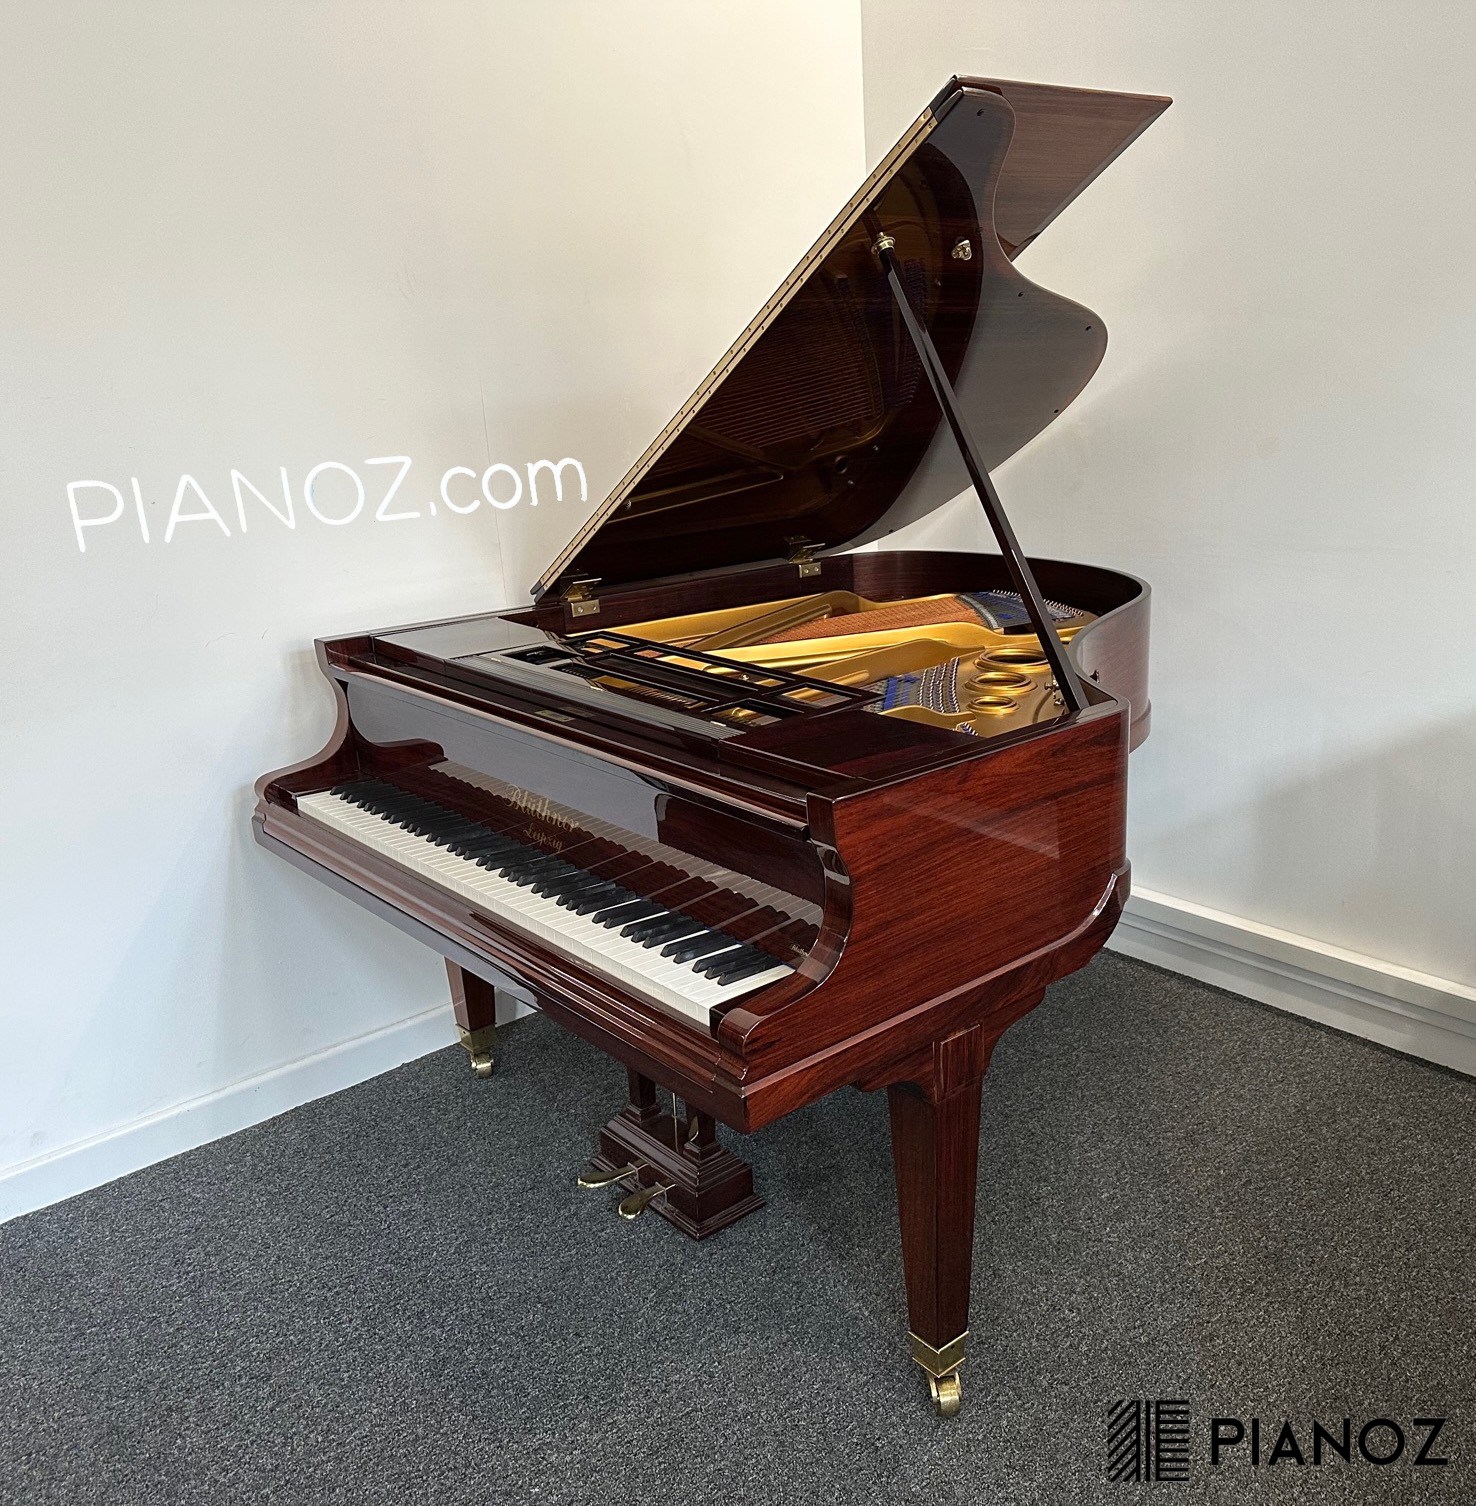 Bluthner Fully Restored Baby Grand Piano piano for sale in UK